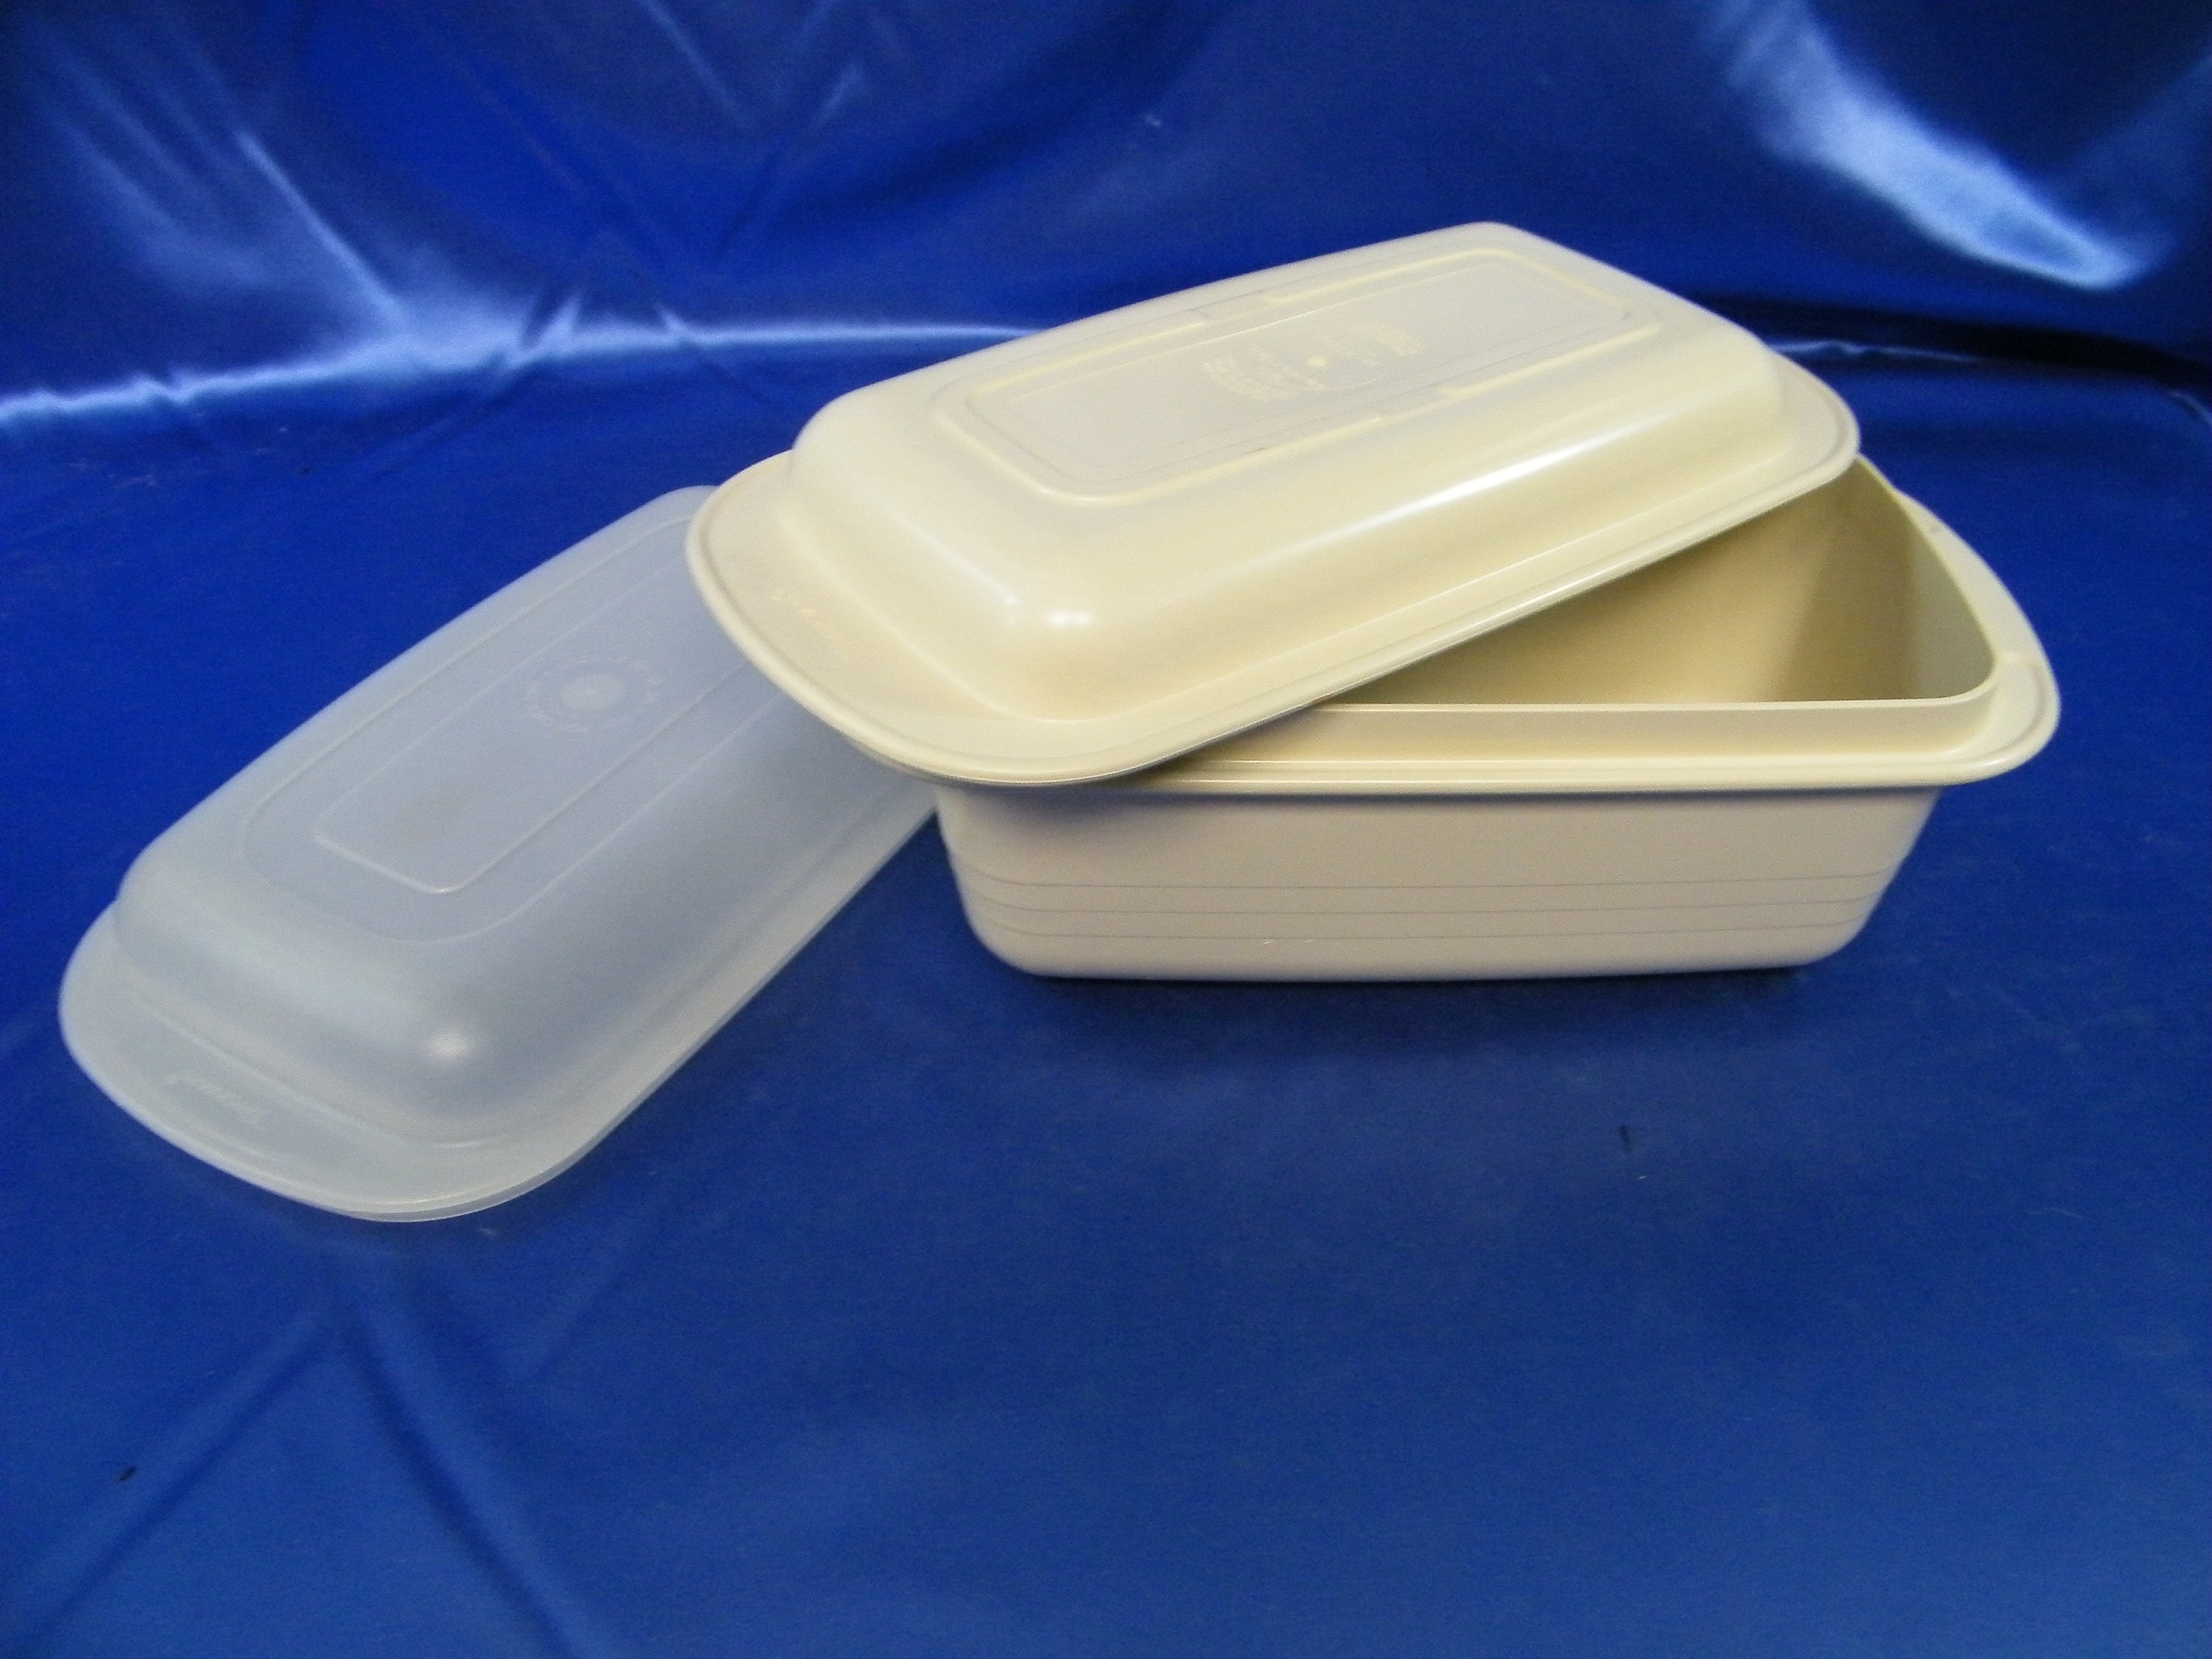 Tupperware Loaf Pan, Oven, Microwave Safe